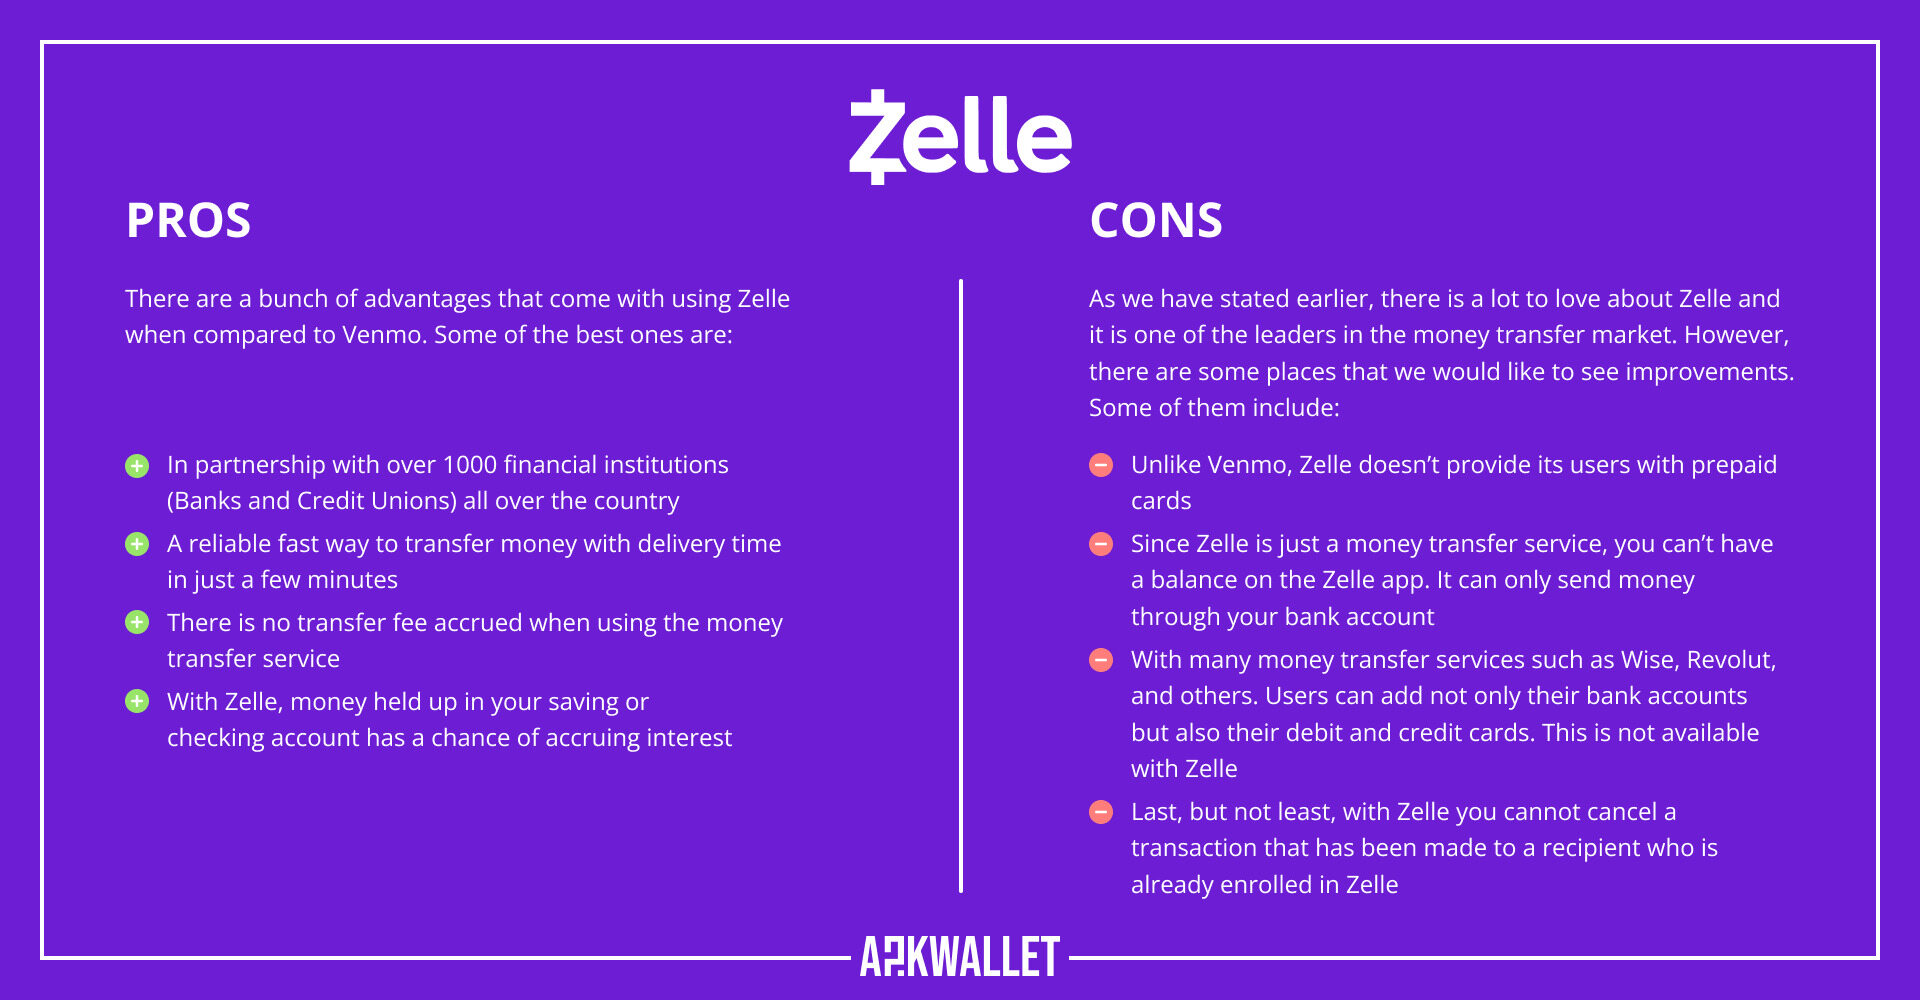 What Are The Pros And Cons Of Zelle